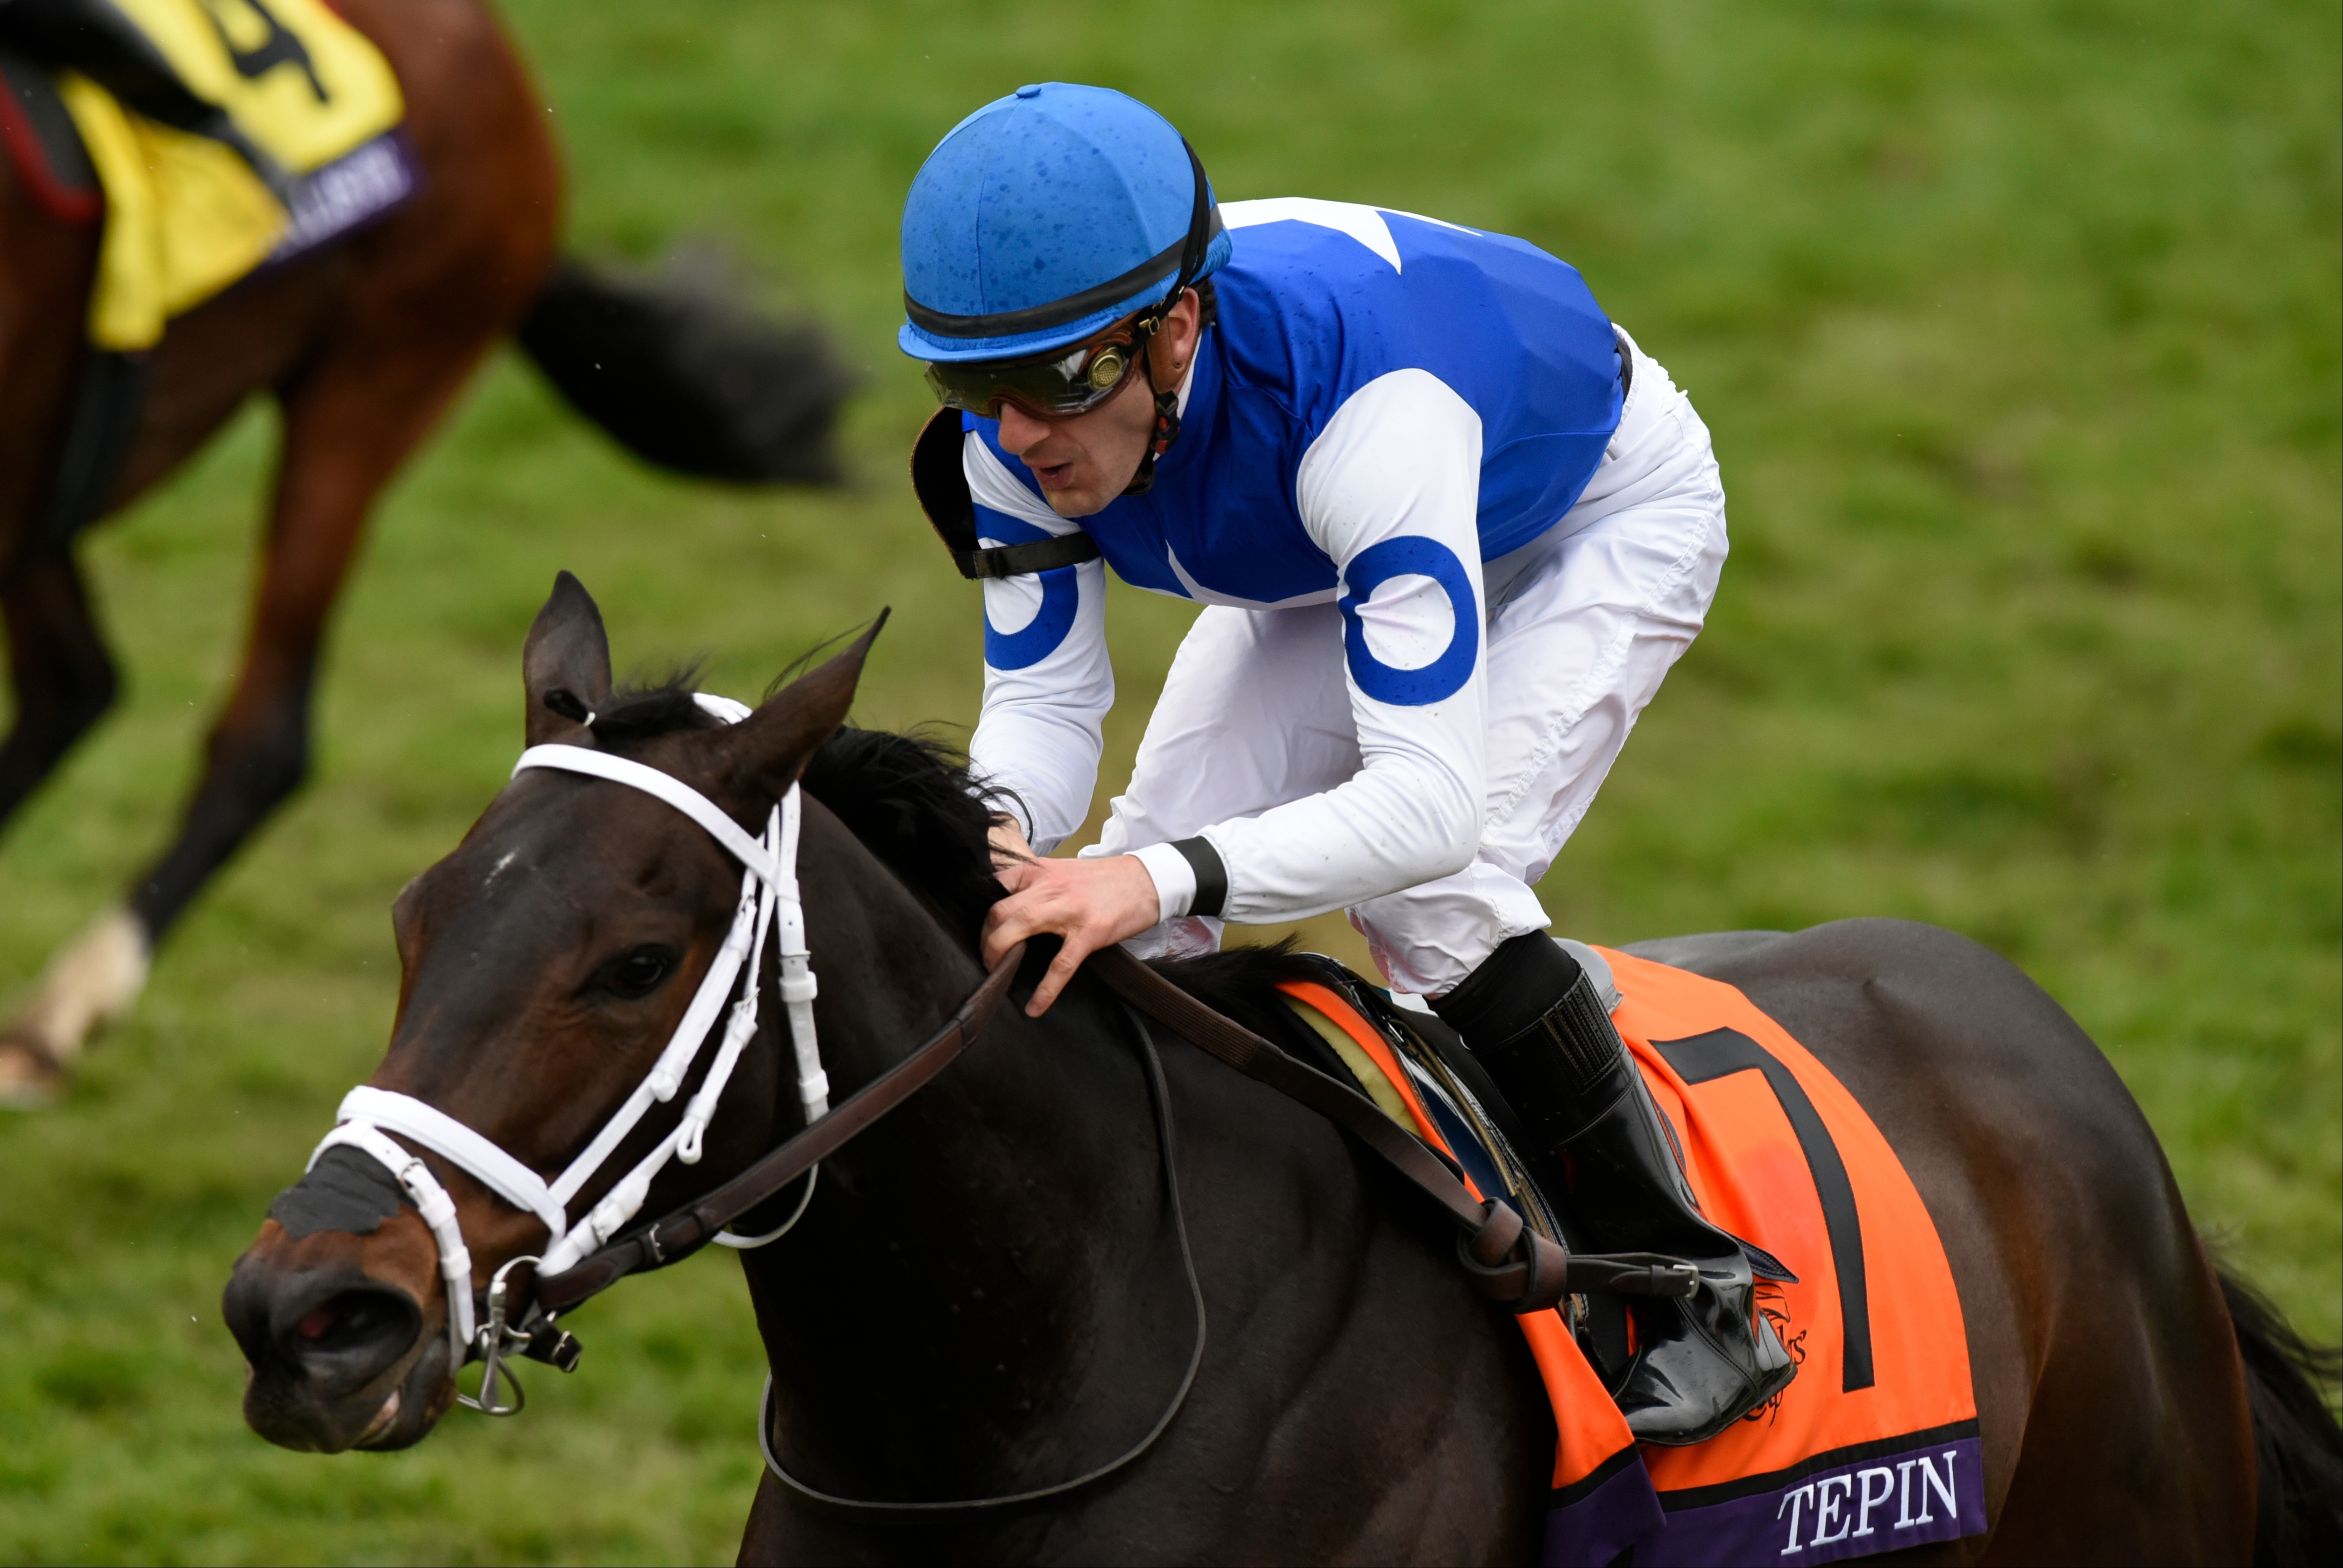 Tepin, Julien Leparoux up, winning the 2015 Breeders' Cup Mile at Keeneland (Breeders' Cup/Eclipse Sporstwire)